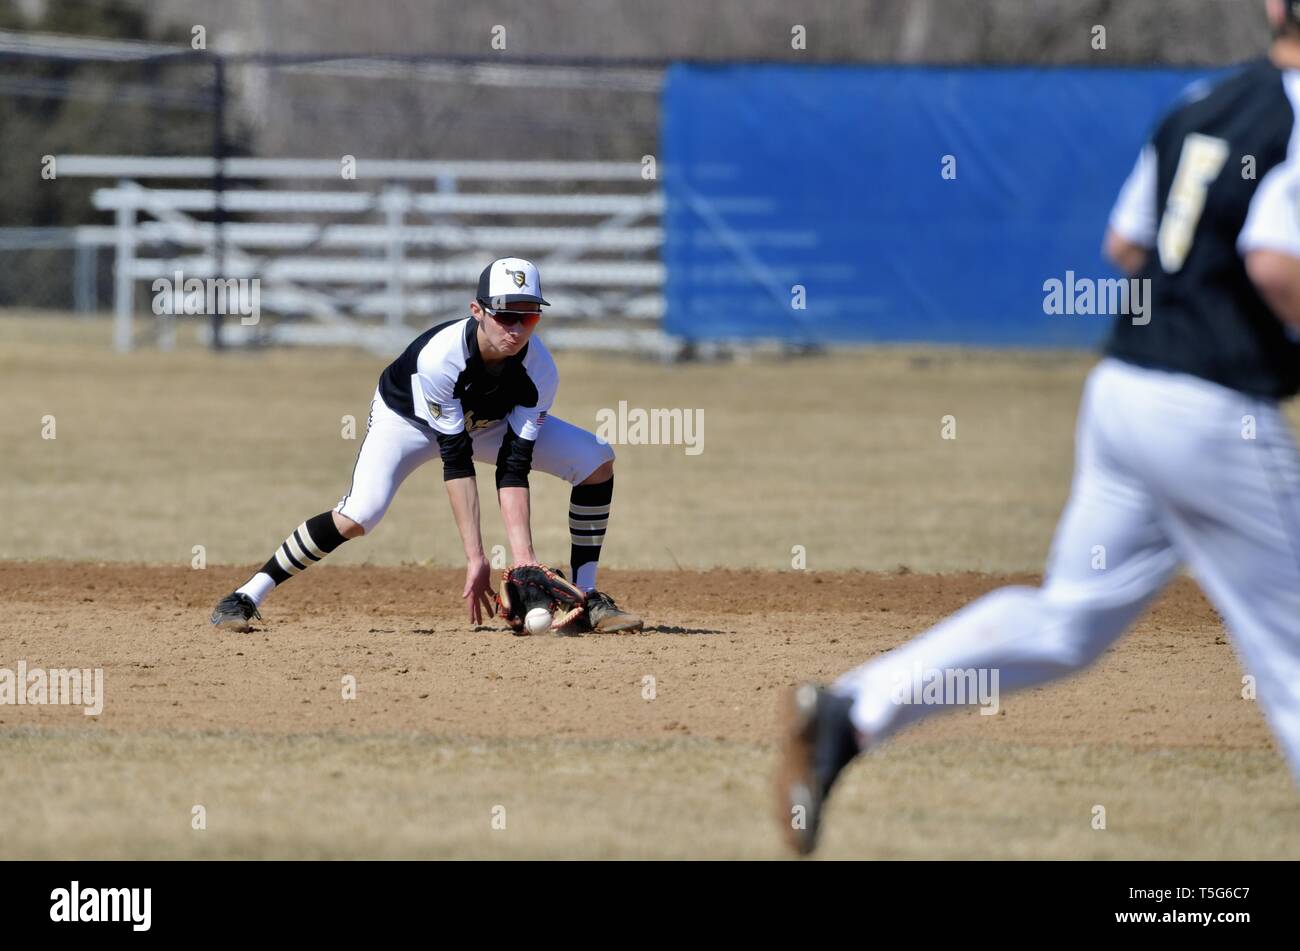 Second baseman fielding a ground ball before throwing on to first base to retire the hitter. USA. Stock Photo